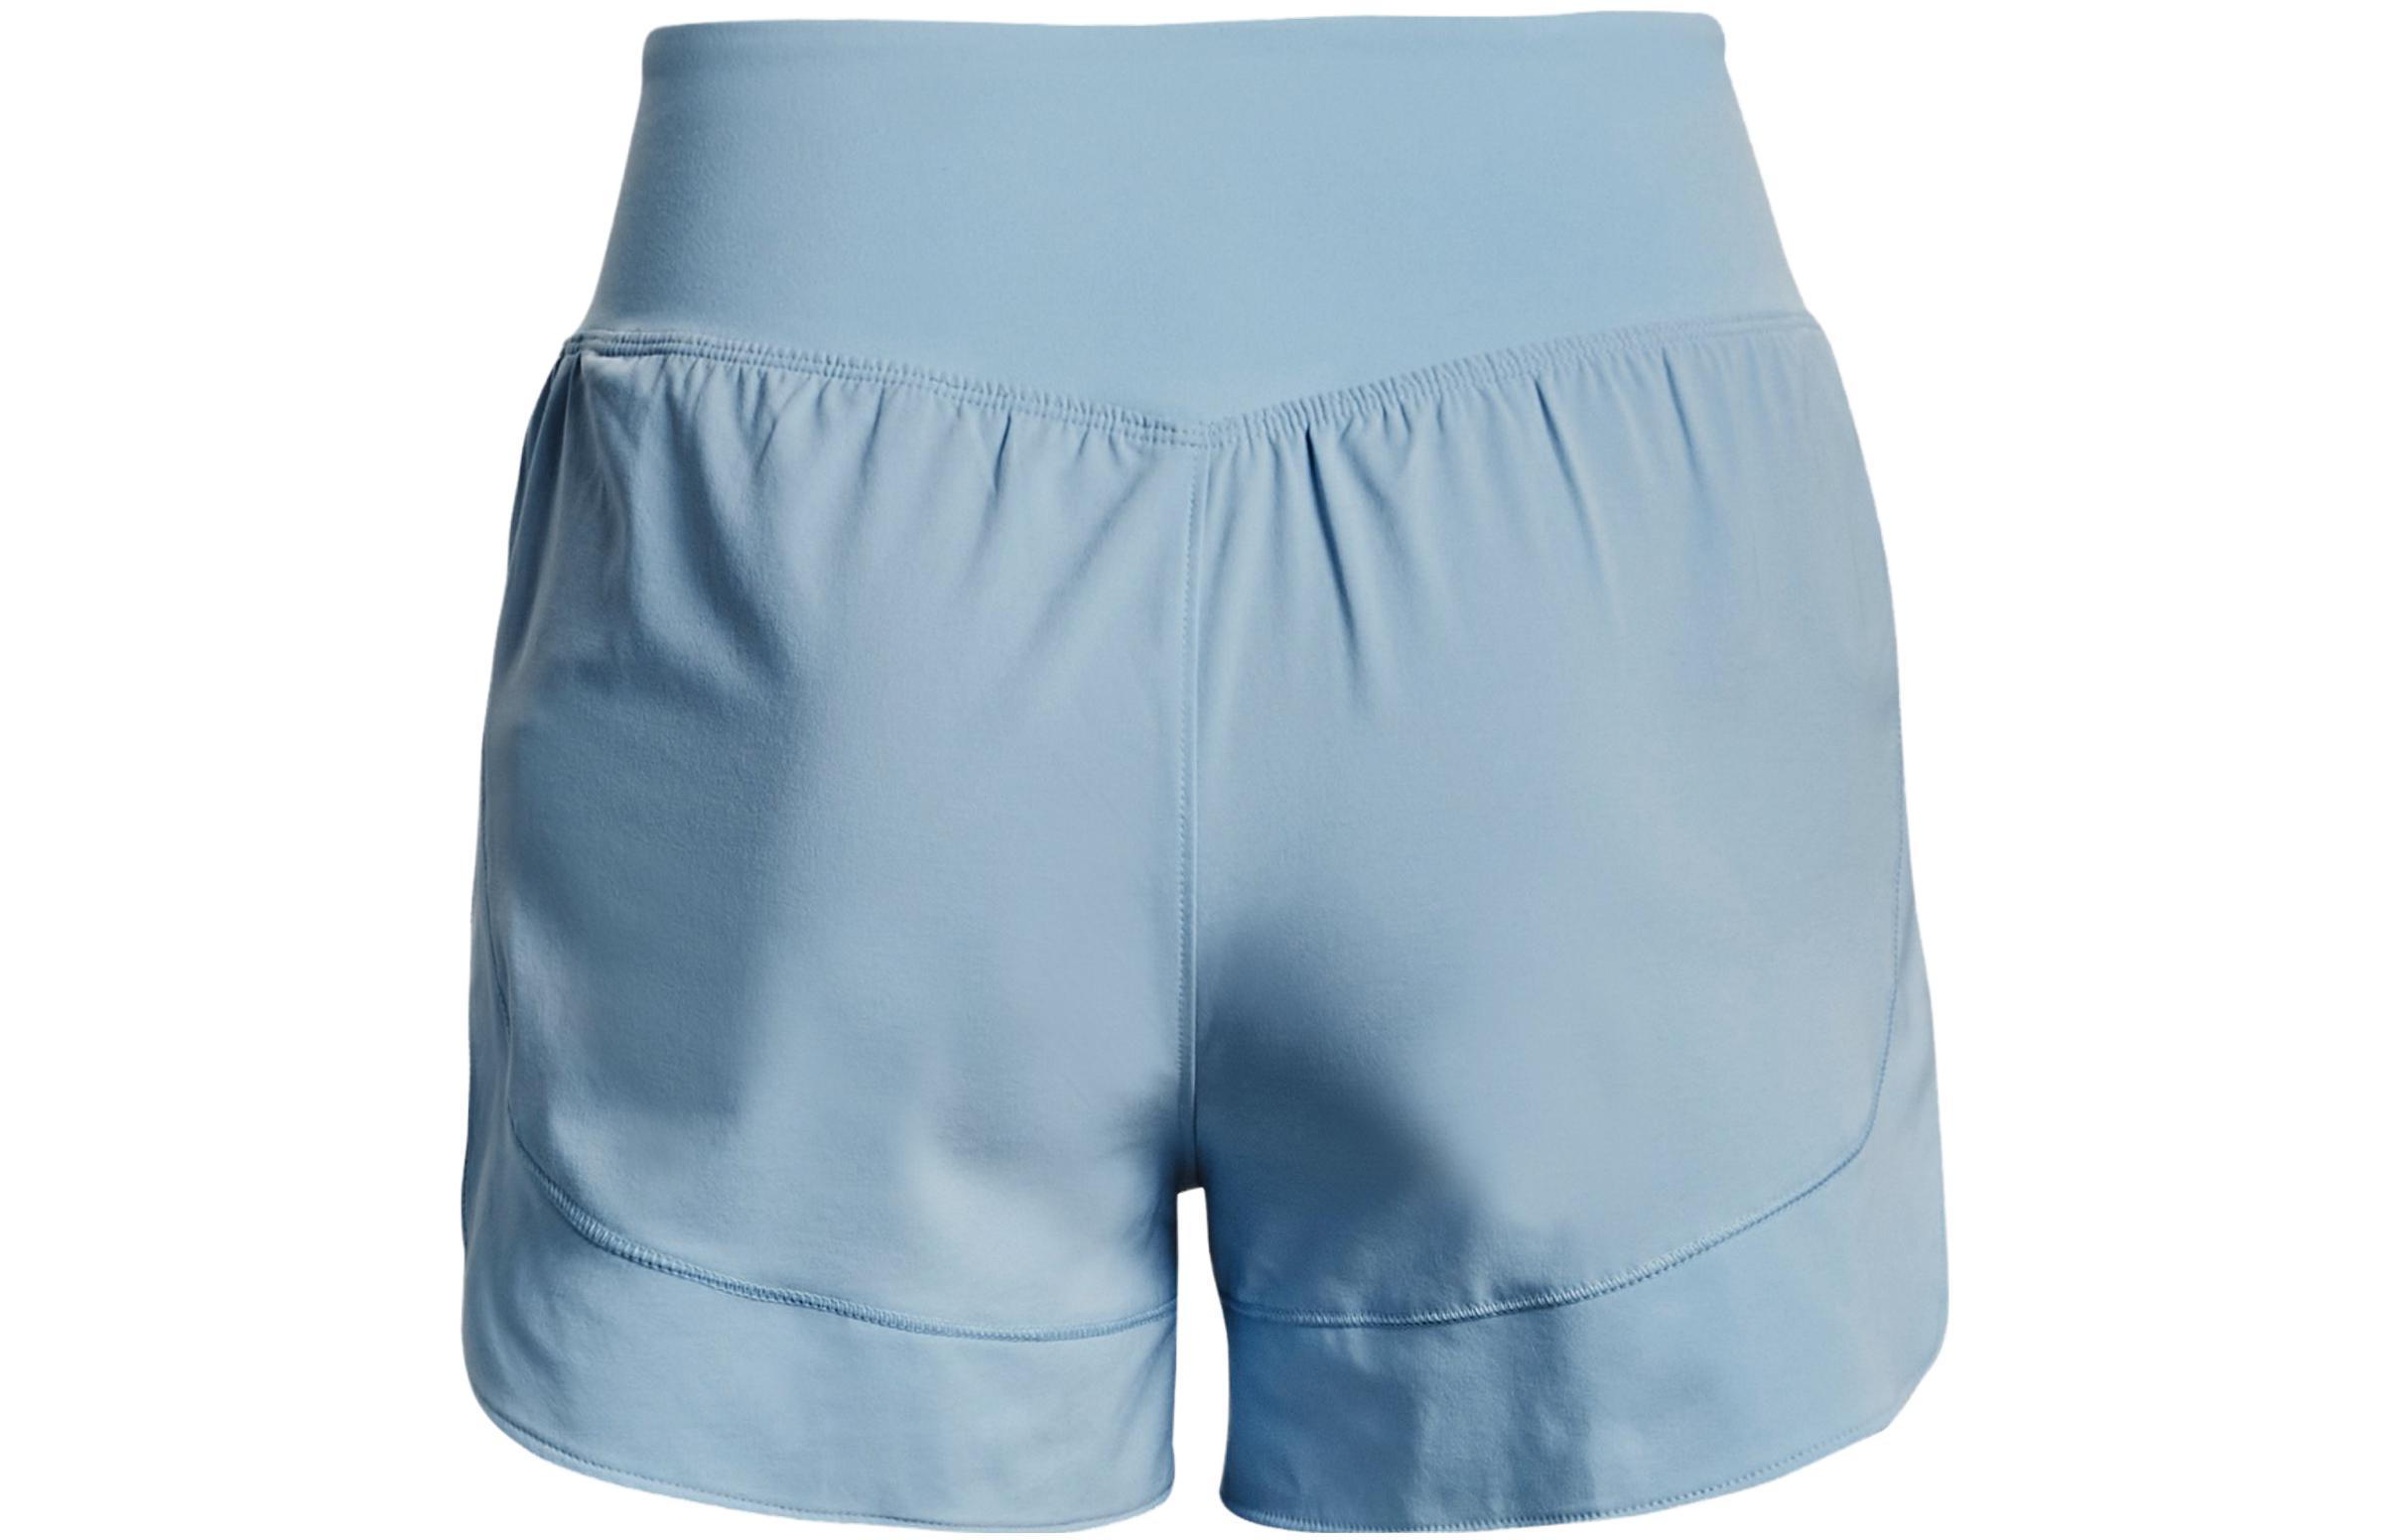 Under Armour SS23 Women's Ua Flex Woven 2-In-1 Shorts Save This Item